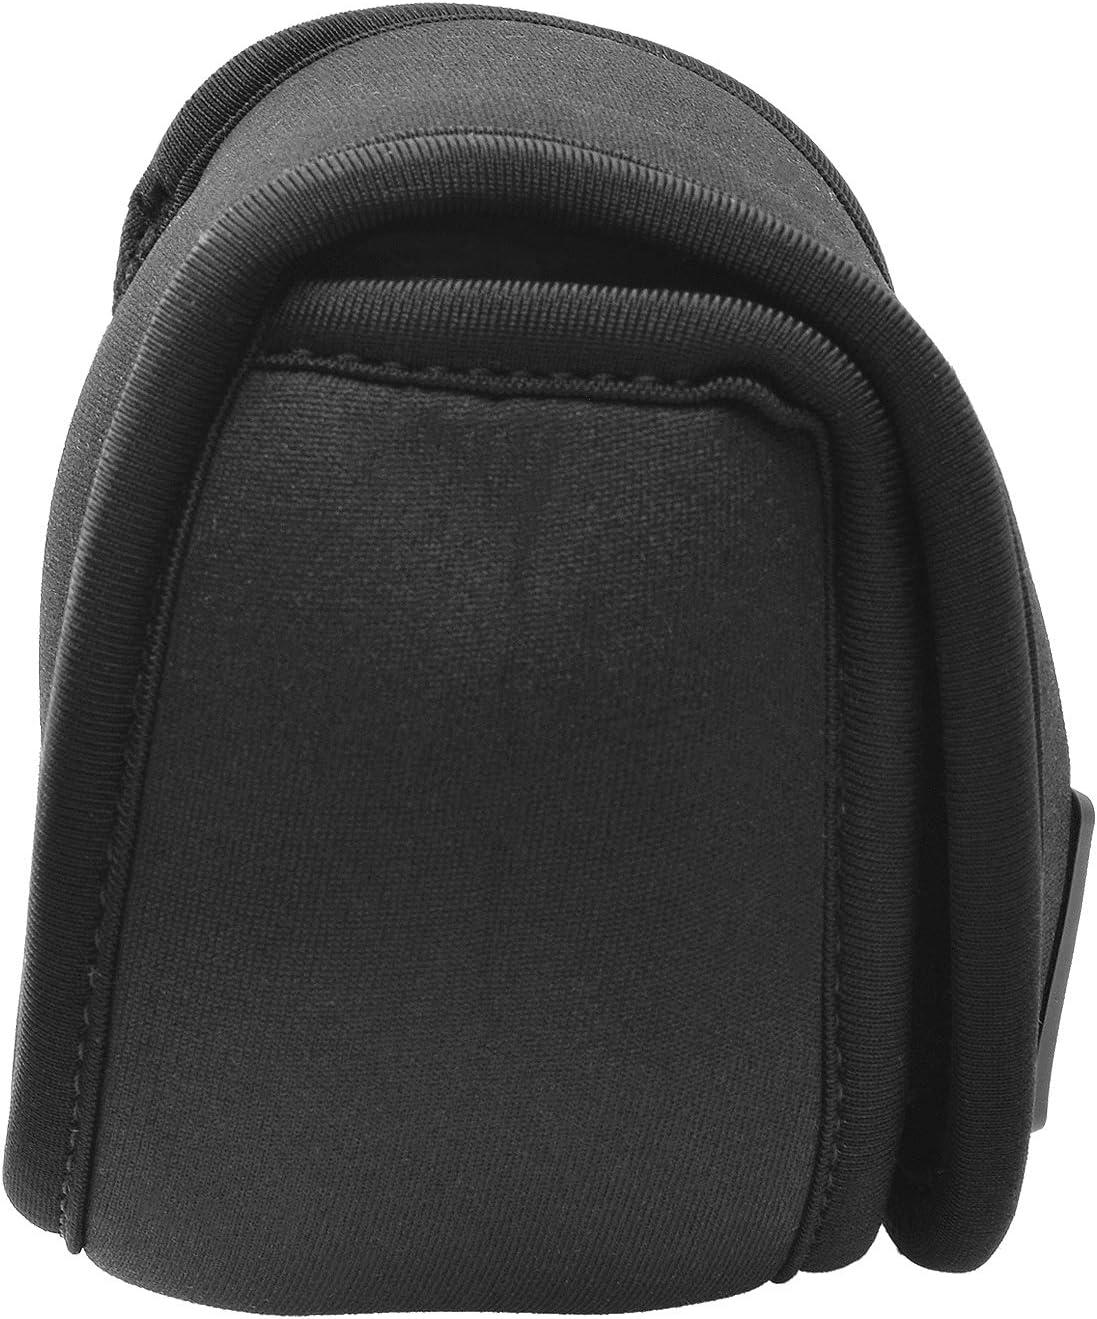 SF Fly Fishing Reel Case Pouch Cover Fit 3/4 5/6 7/8 wt Black 1PCS